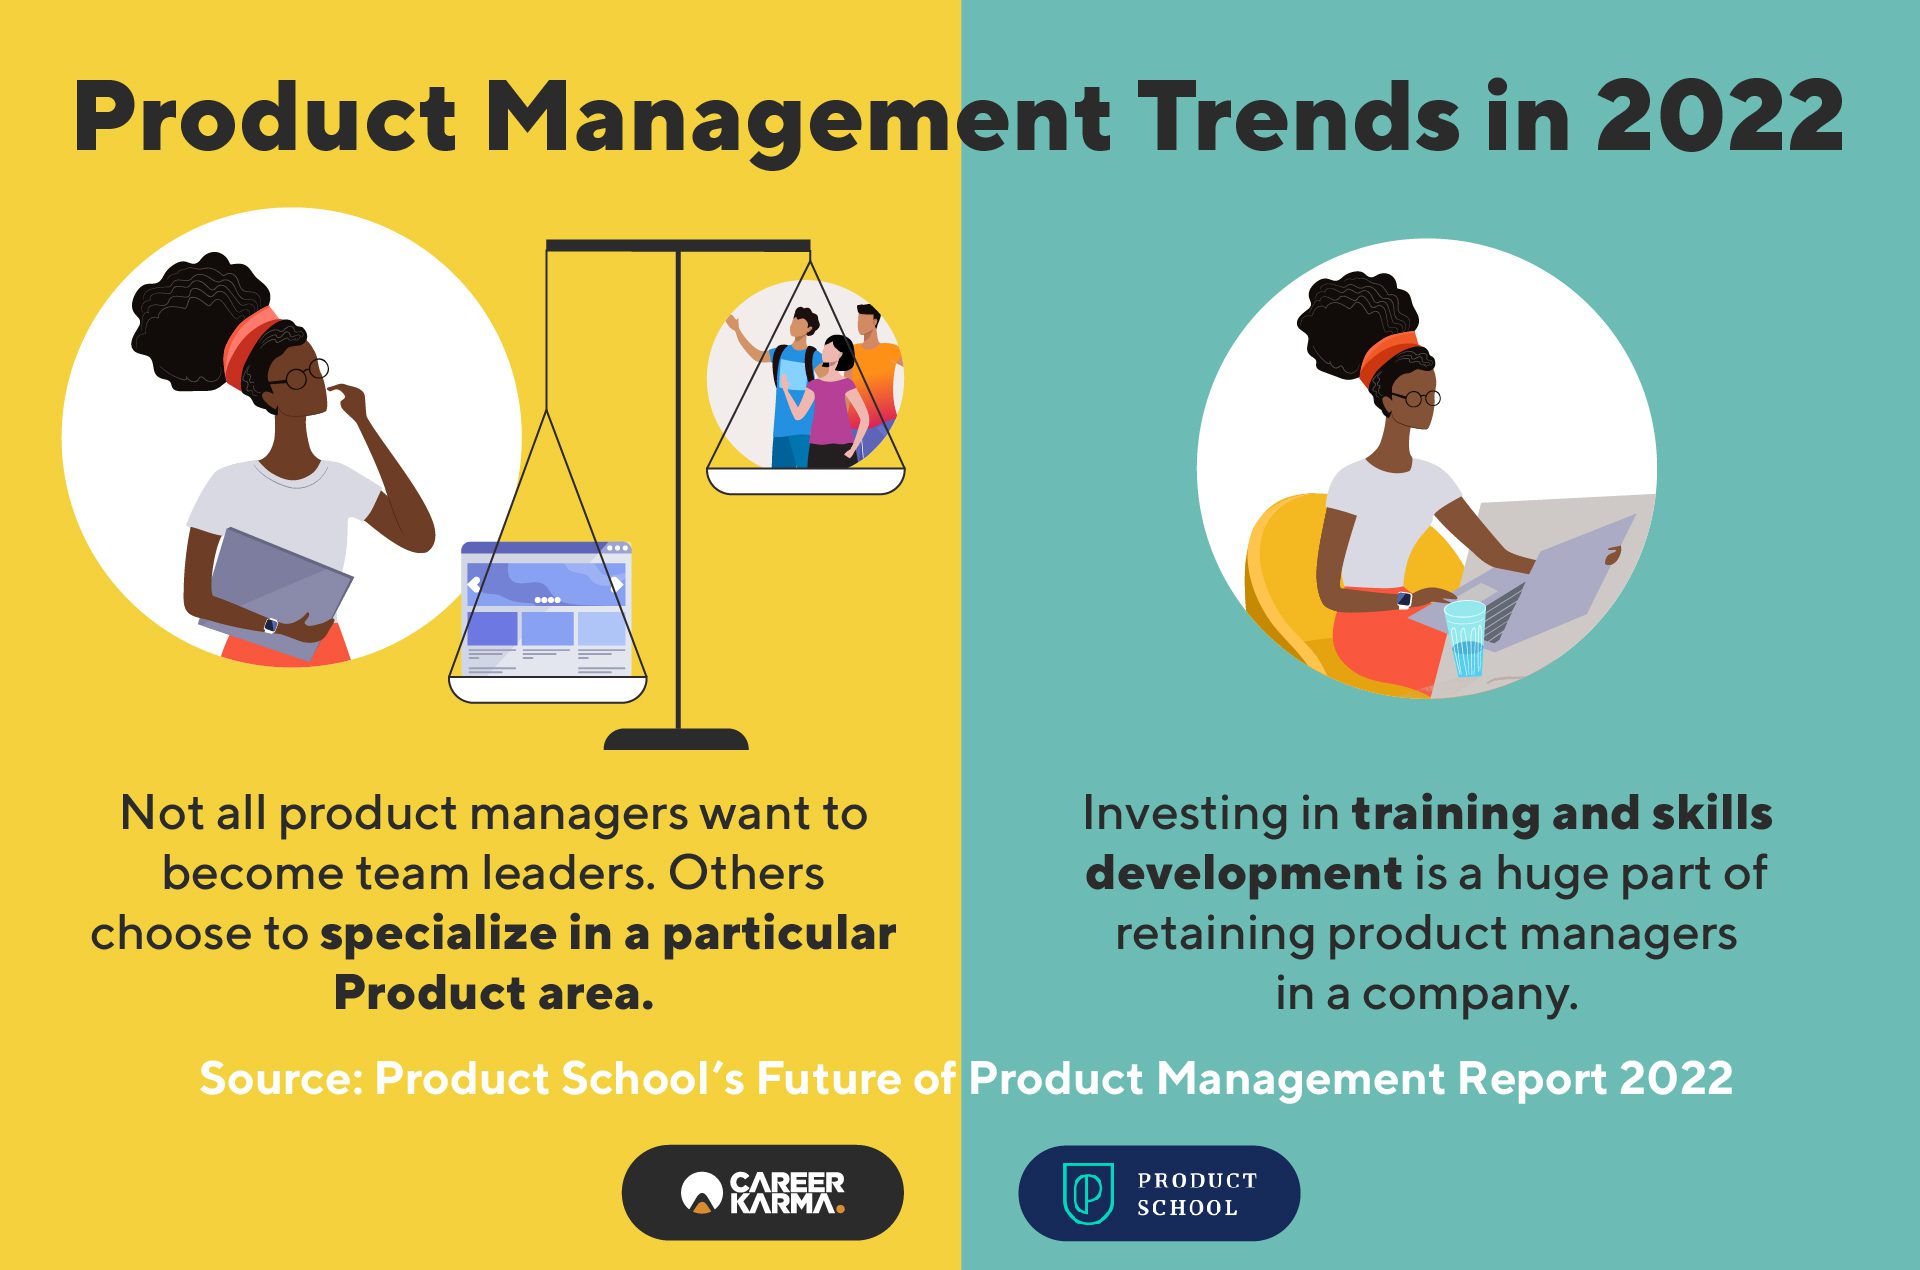 An infographic showing product management trends in 2022